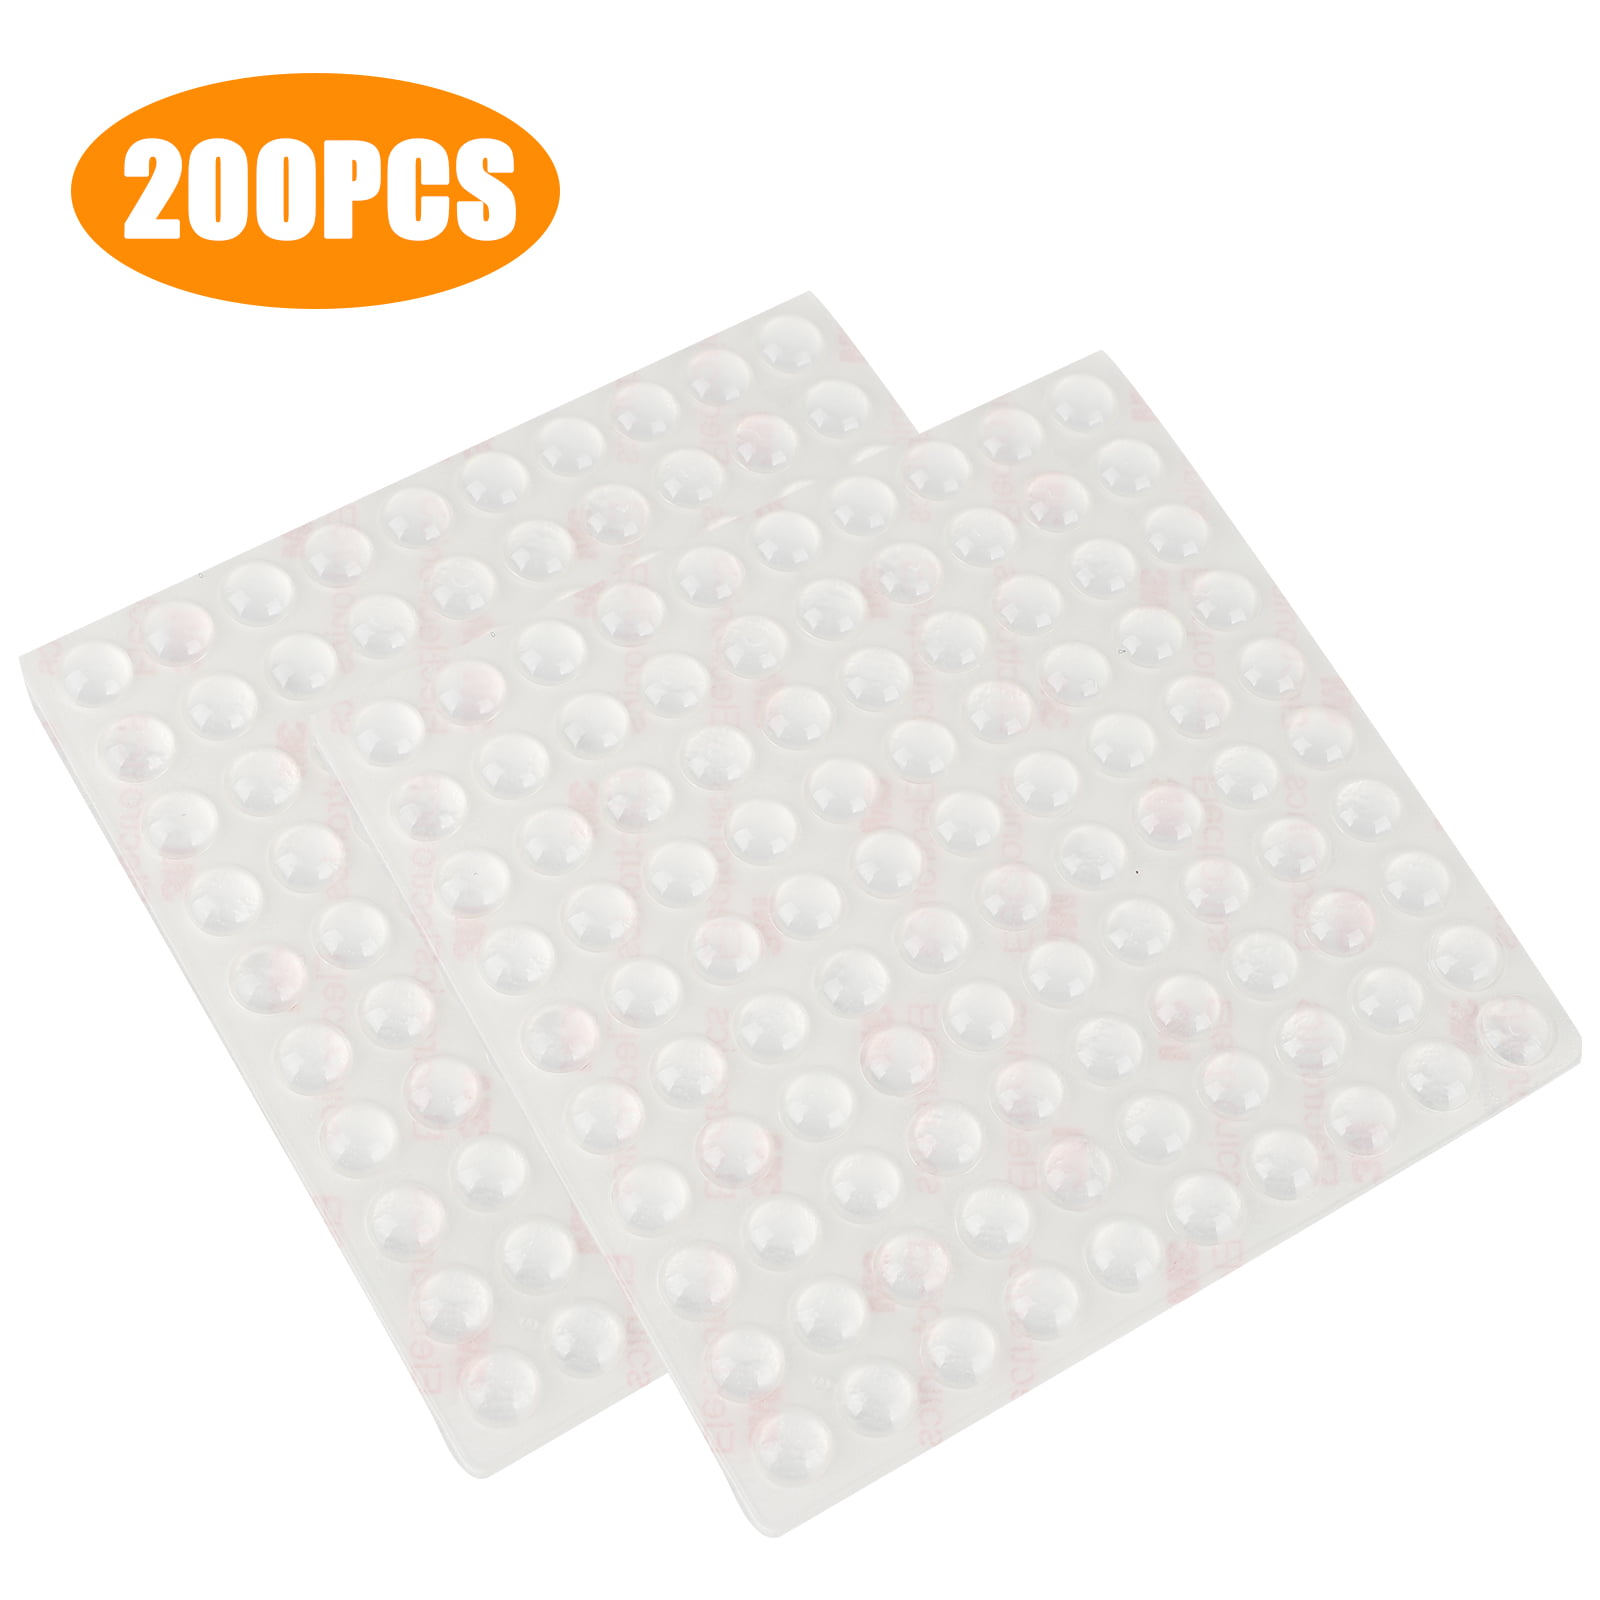 Perforated Sheet 24 Length Polypropylene Staggered Holes 0.375 Center to Center Staggered 1/4 Holes PP Opaque White 12 Width 0.250 Thickness 